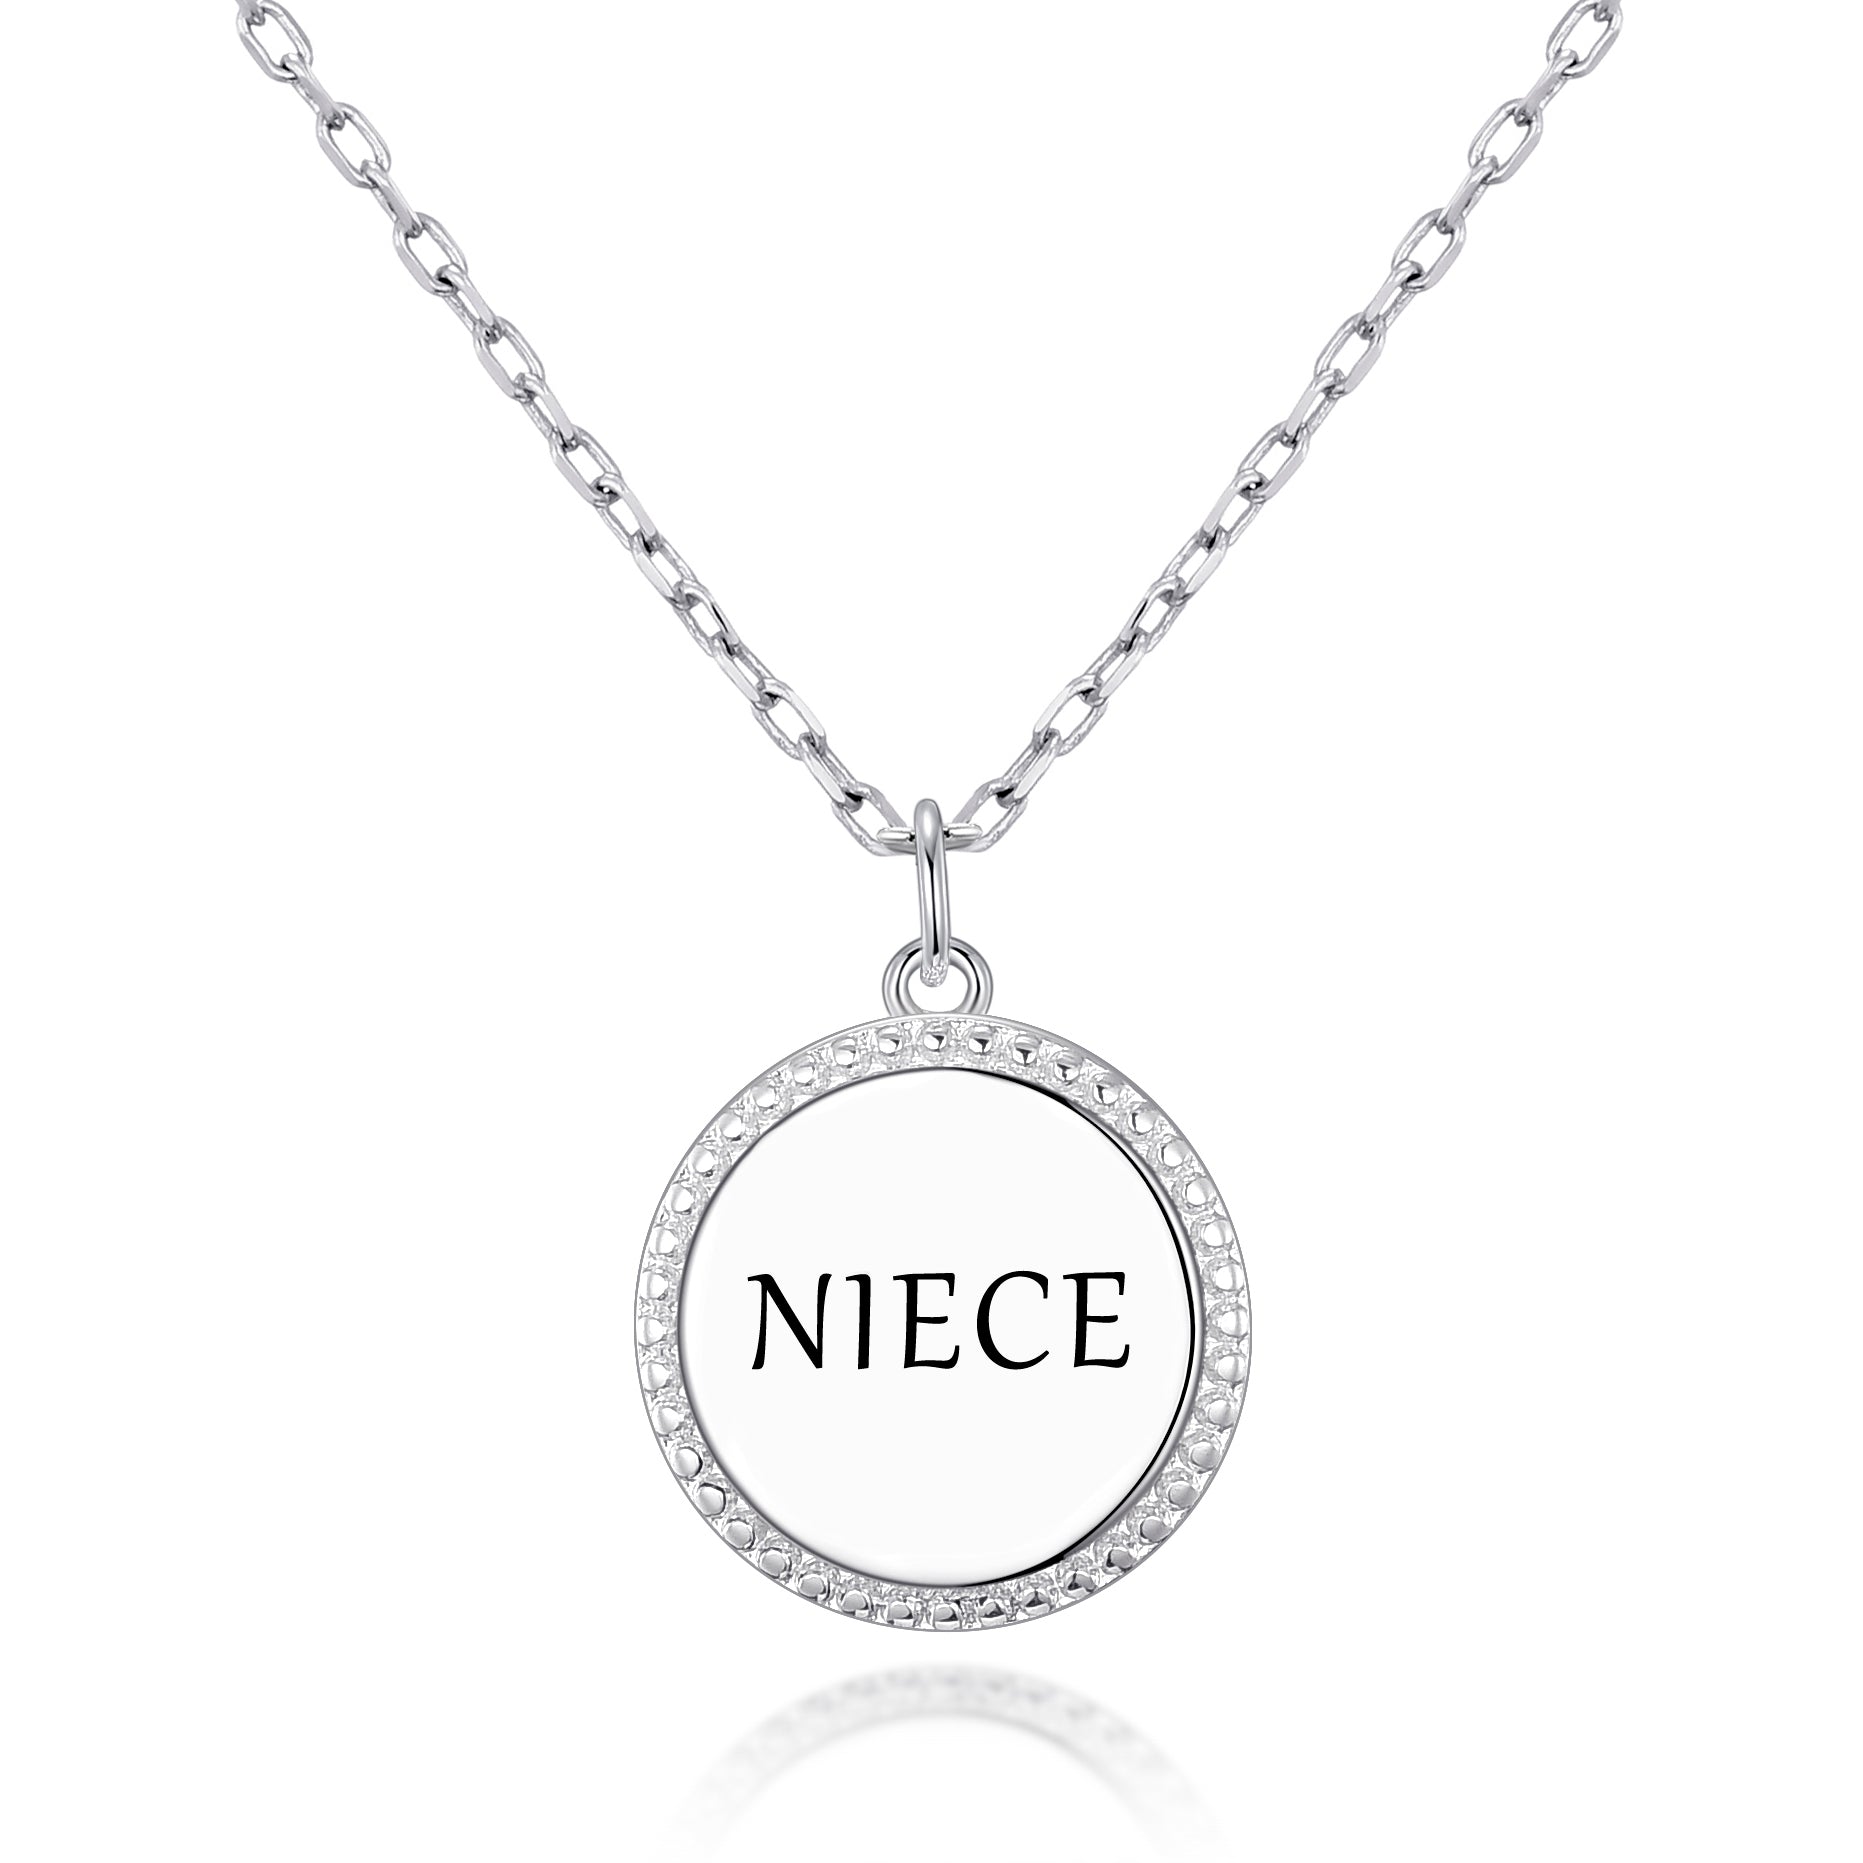 Silver Plated Filigree Disc Niece Necklace by Philip Jones Jewellery